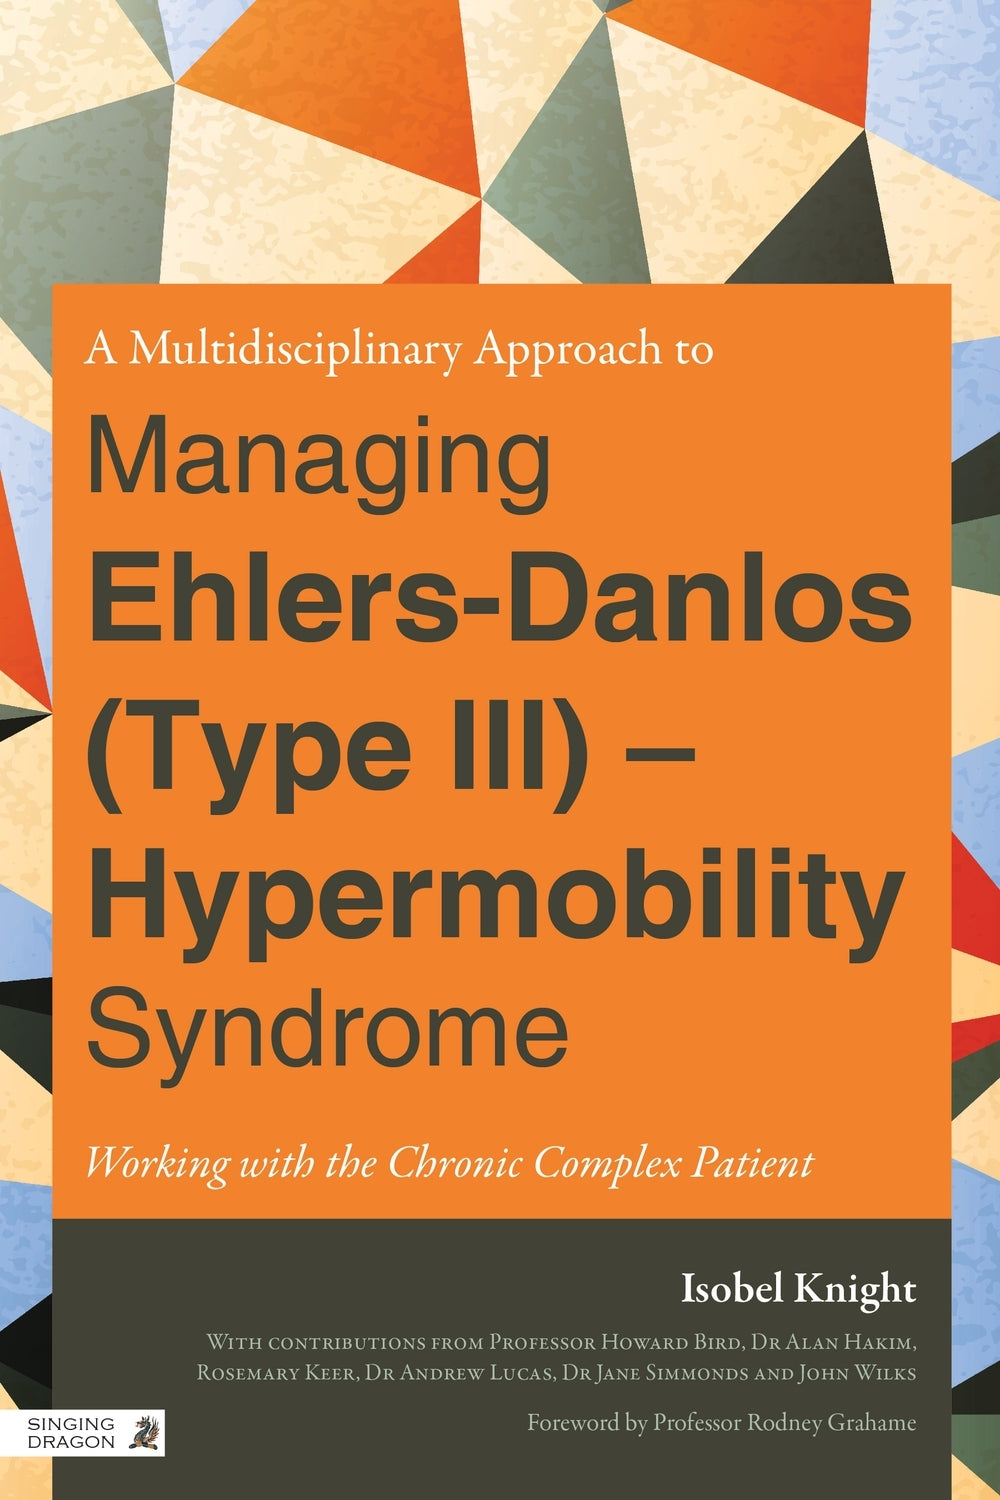 A Multidisciplinary Approach to Managing Ehlers-Danlos (Type III) - Hypermobility Syndrome by Rodney Grahame, Isobel Knight